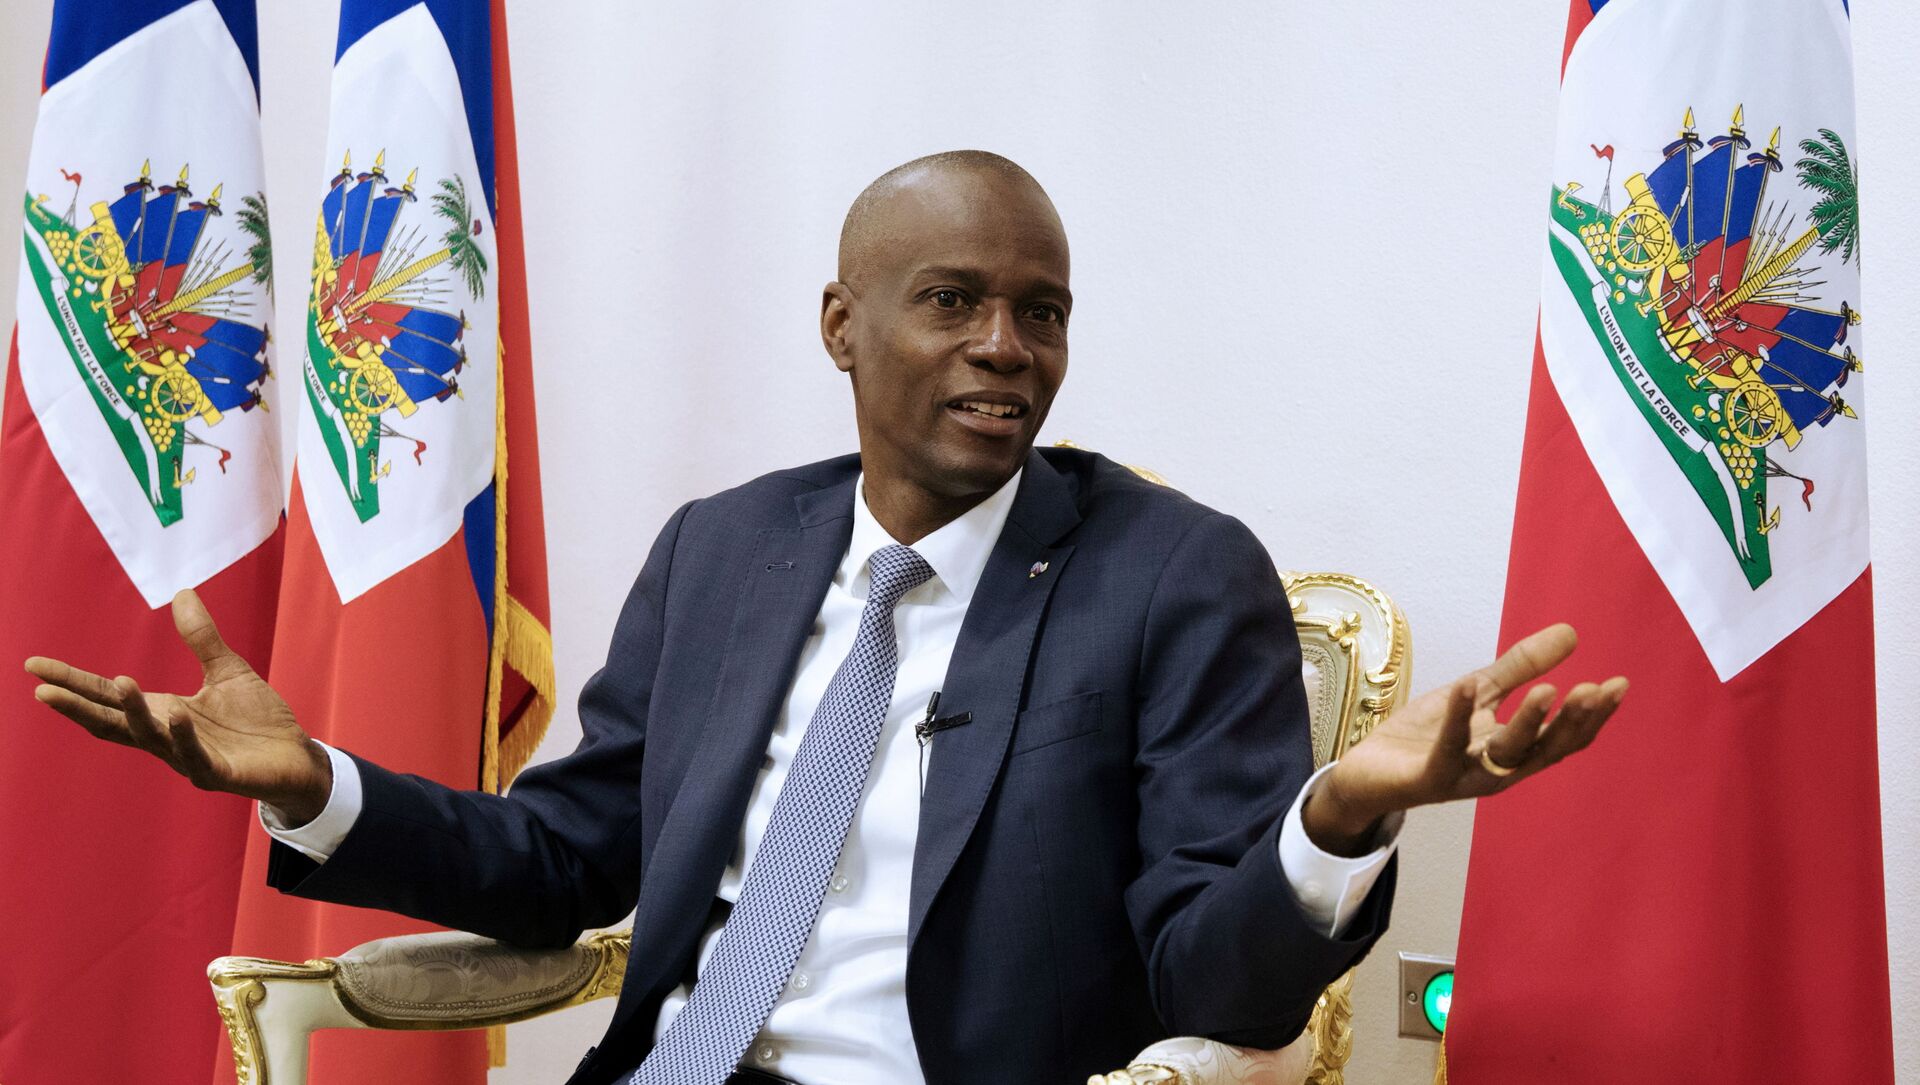 FILE PHOTO: Haiti's President Jovenel Moise speaks during an interview with Reuters at the National Palace of Port-au-Prince, Haiti January 11, 2020. REUTERS/Valerie Baeriswyl/File Photo - Sputnik International, 1920, 07.07.2021